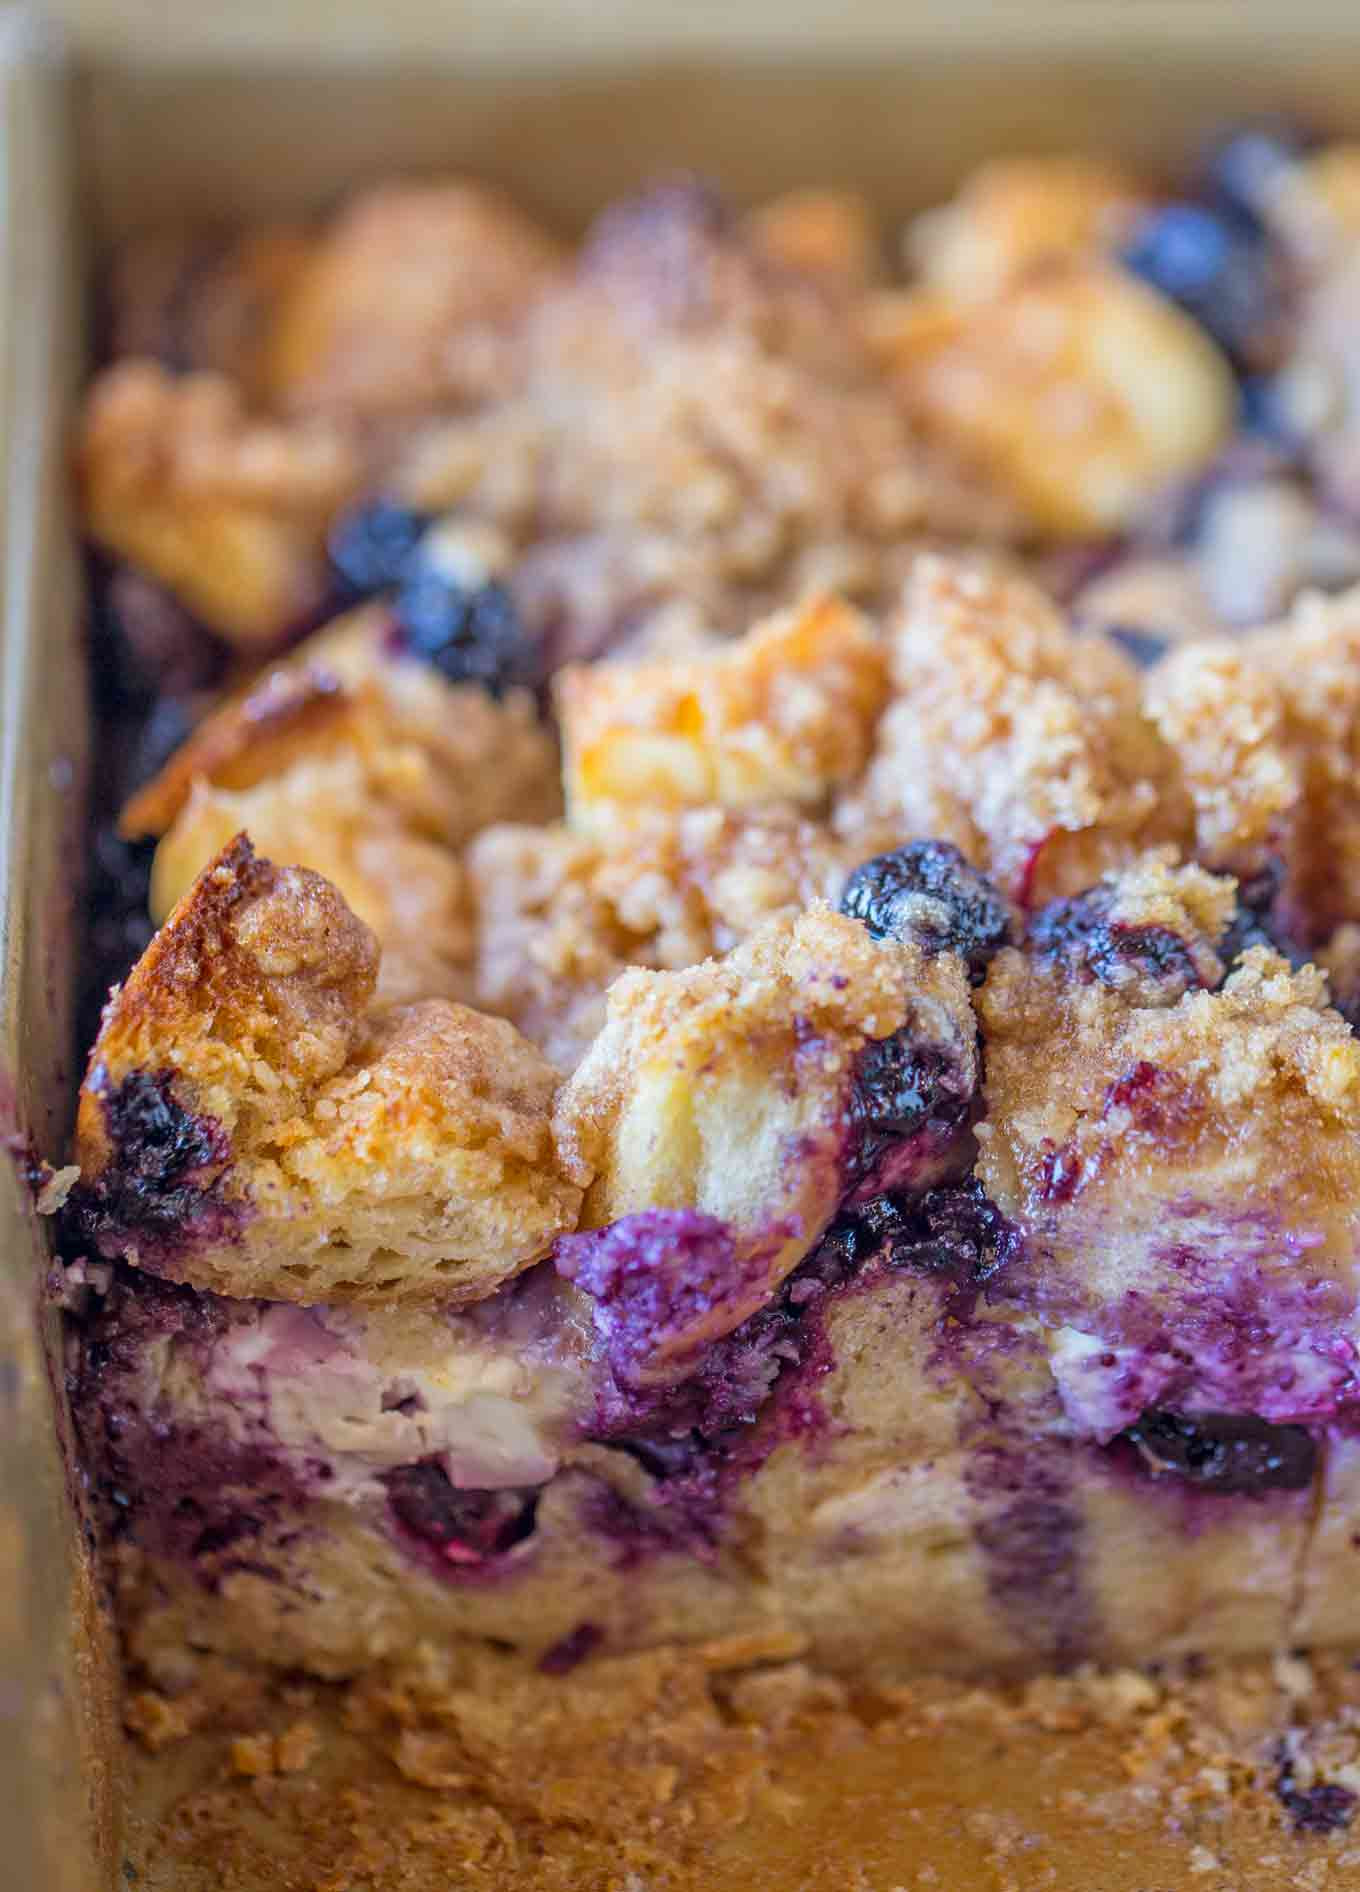 Blueberry Cream Cheese French Toast
 Blueberry Cream Cheese French Toast Bake Dinner then